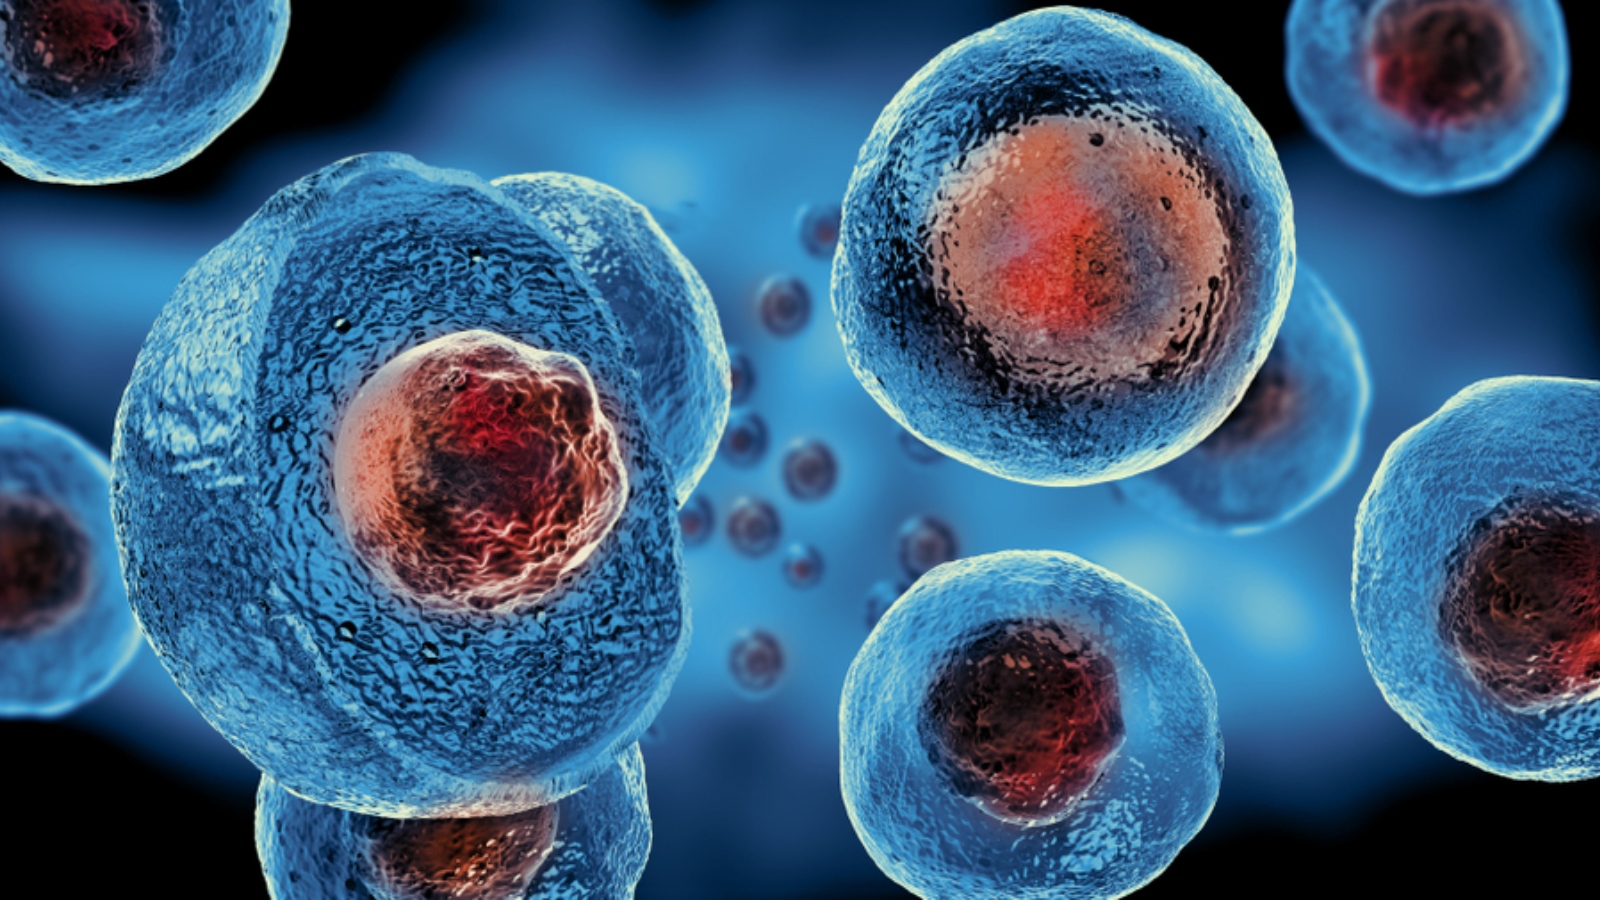 Pluristem uses cells derived from placenta for the development of product candidates for the treatment of medical conditions. Image by Giovanni Cancemi/Shutterstock.com